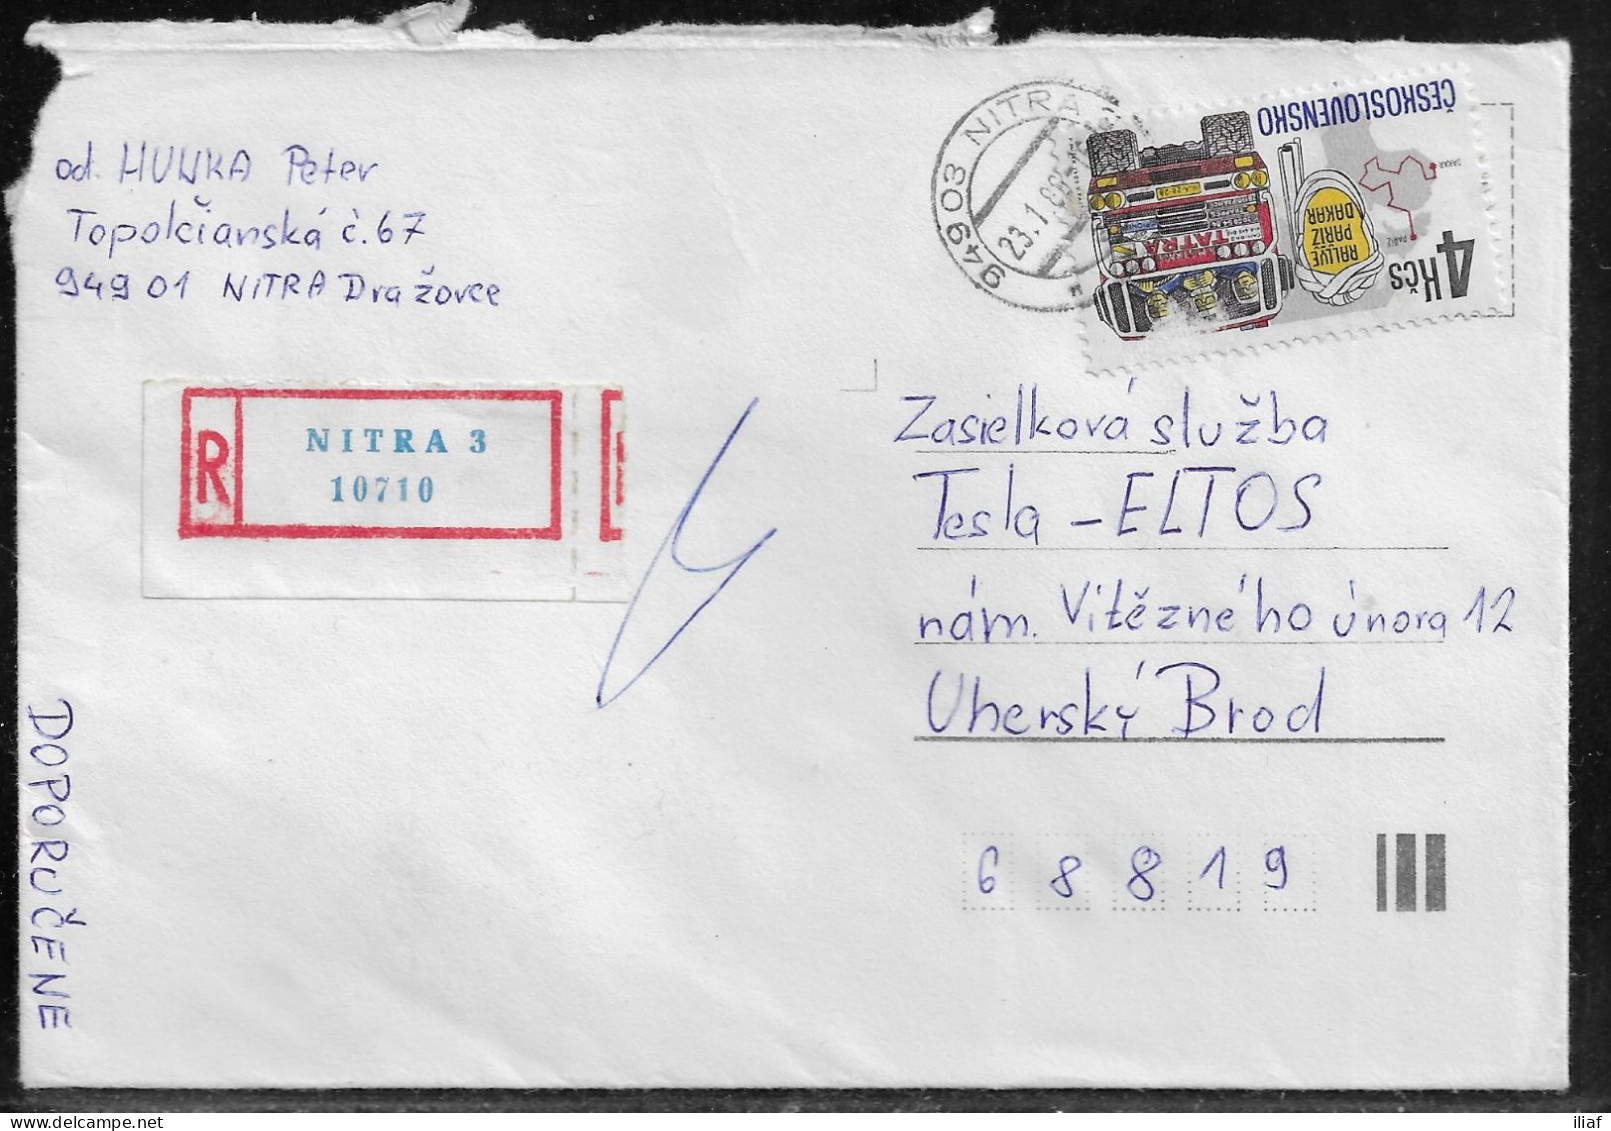 Czechoslovakia. Stamp Sc. 2728 On Registered Letter, Sent From Nitra 23.01.89 For “Tesla” Uhersky Brod. - Covers & Documents